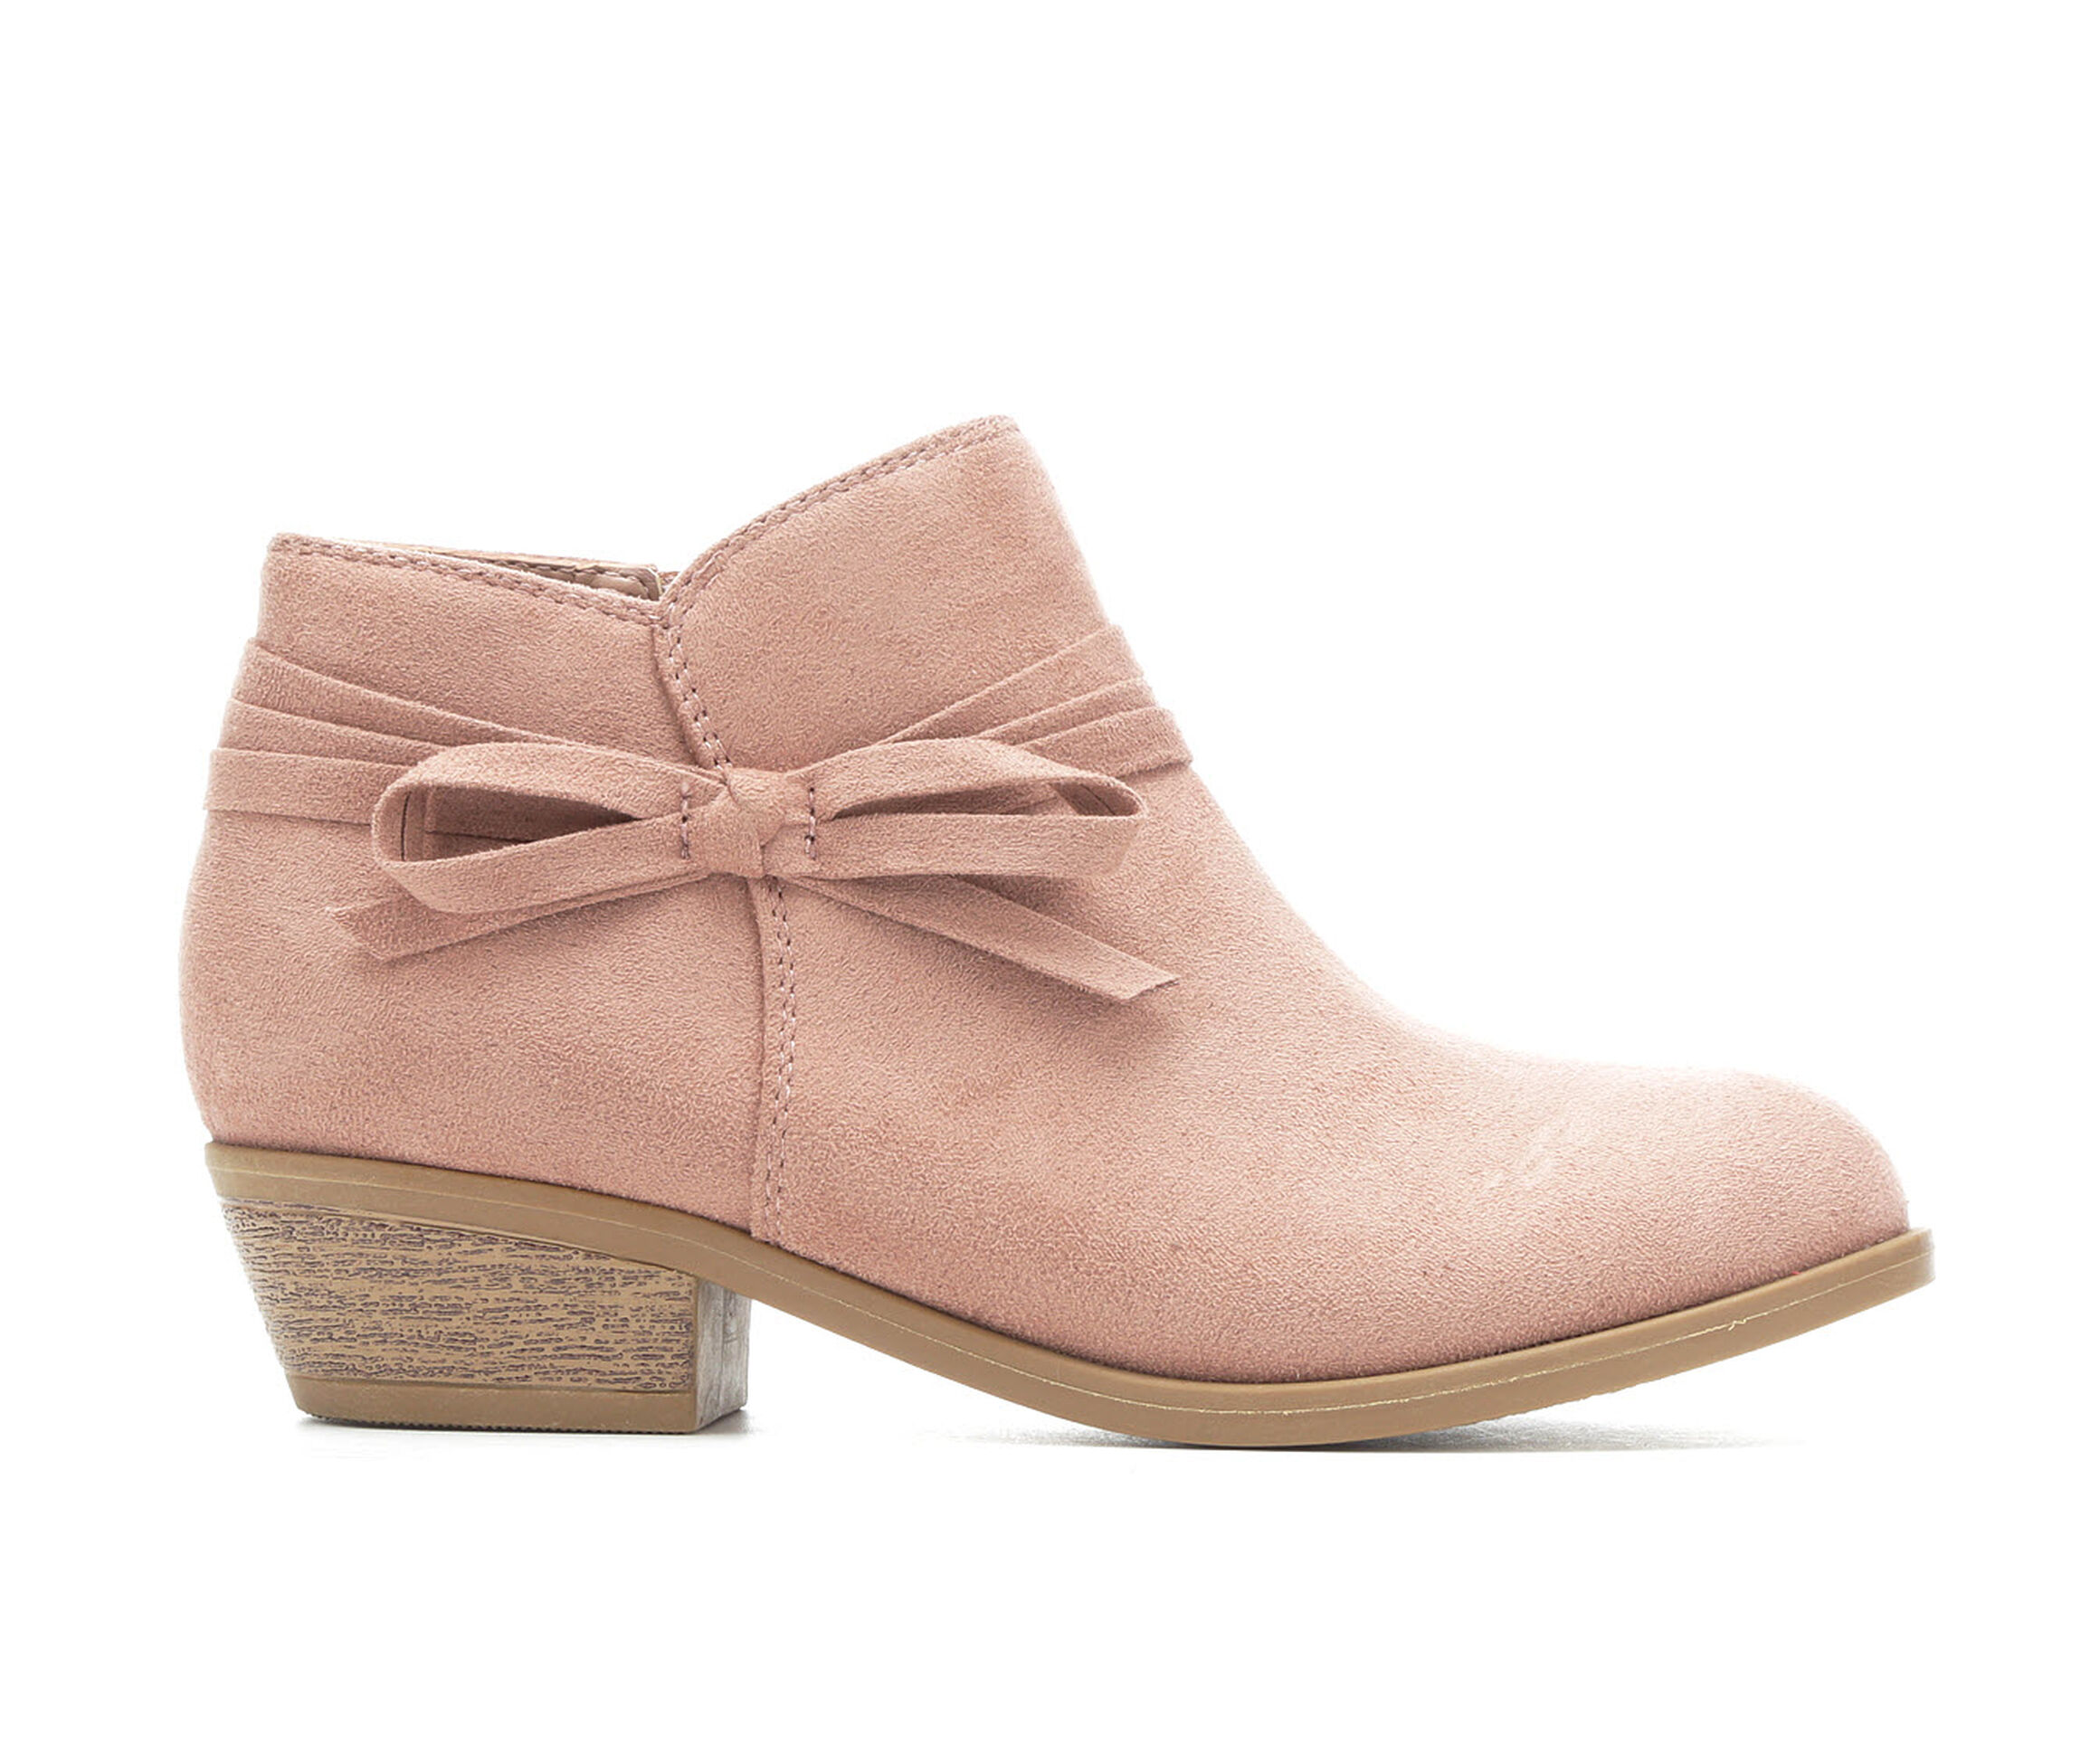 Girls' Ankle Boots | Shoe Carnival